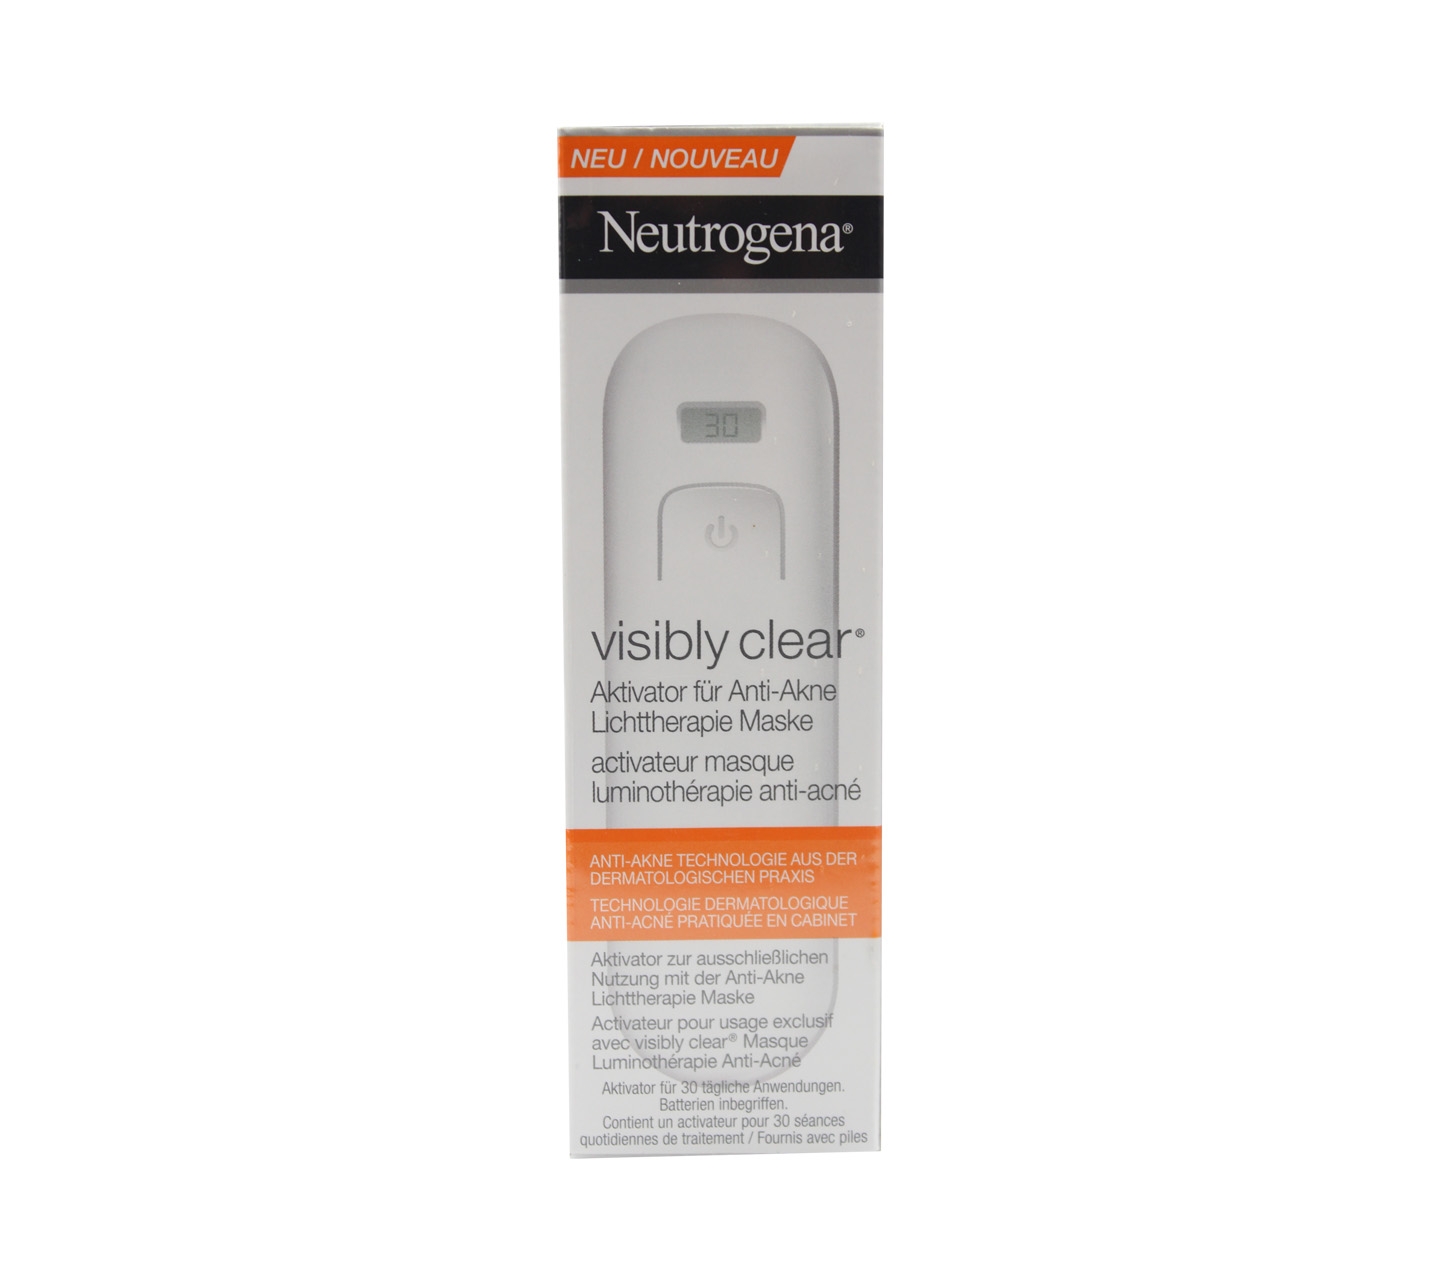 Neutrogena Visibly Clear Light Therapy Acne Mask Activator Skin Care